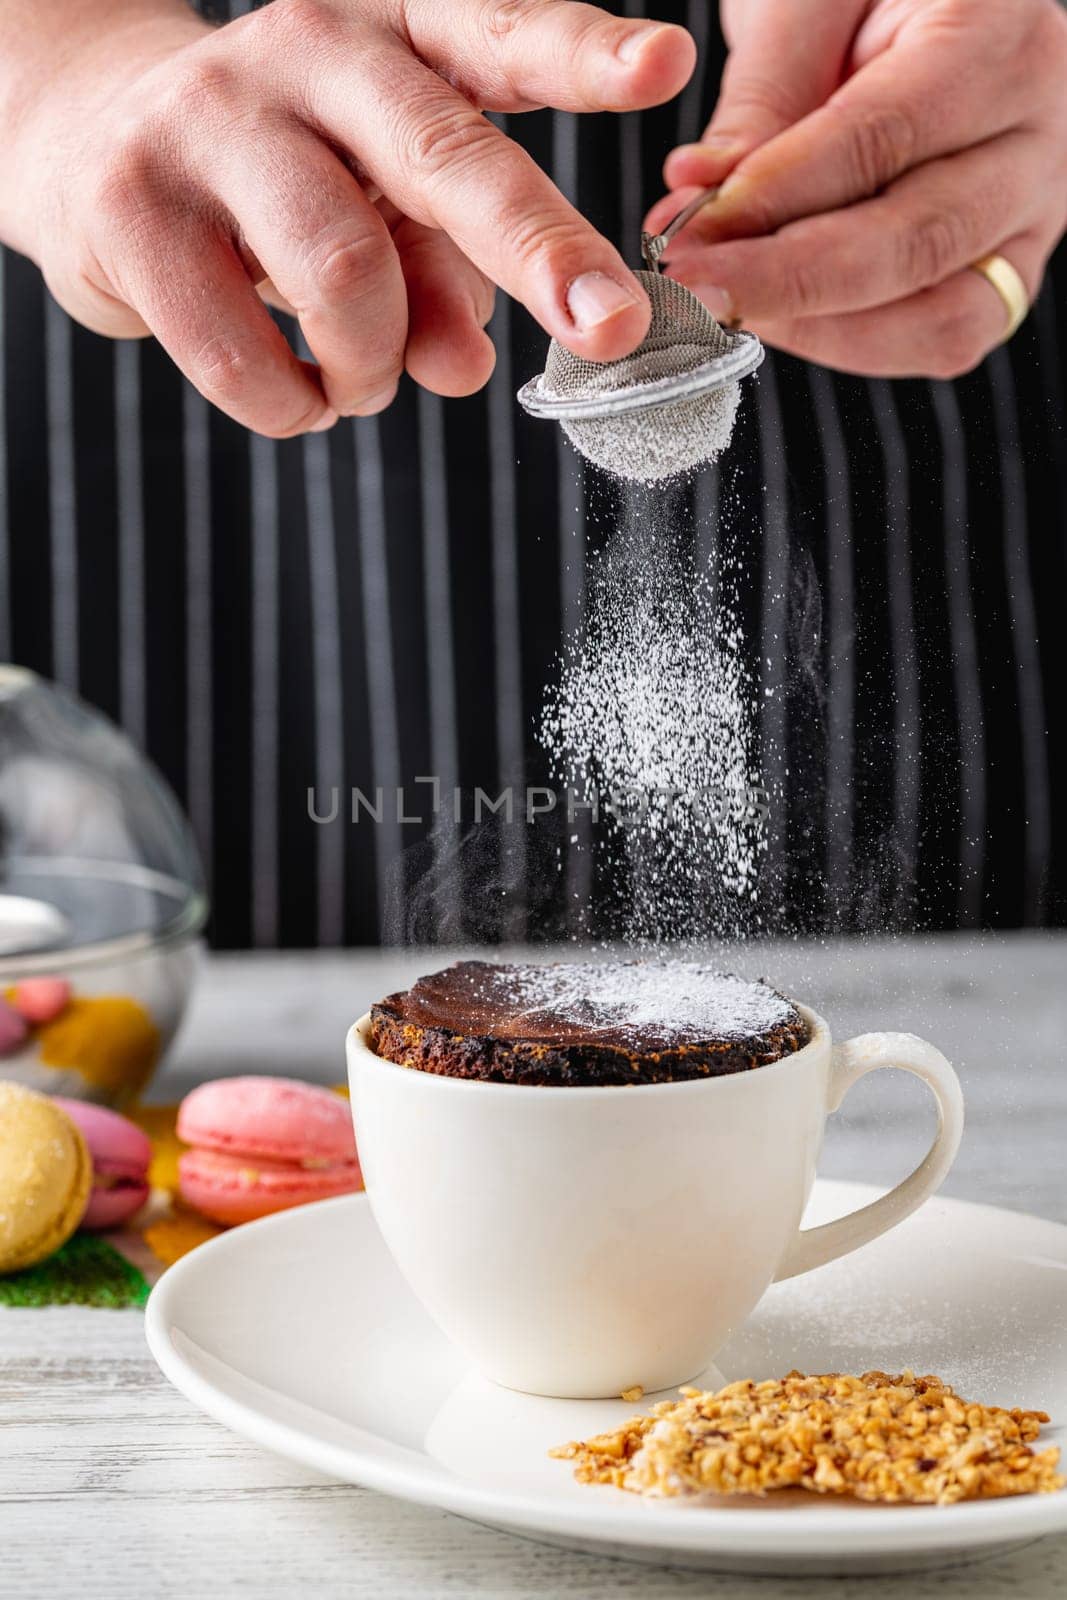 Chocolate soufflé in white porcelain cup on wooden table by Sonat